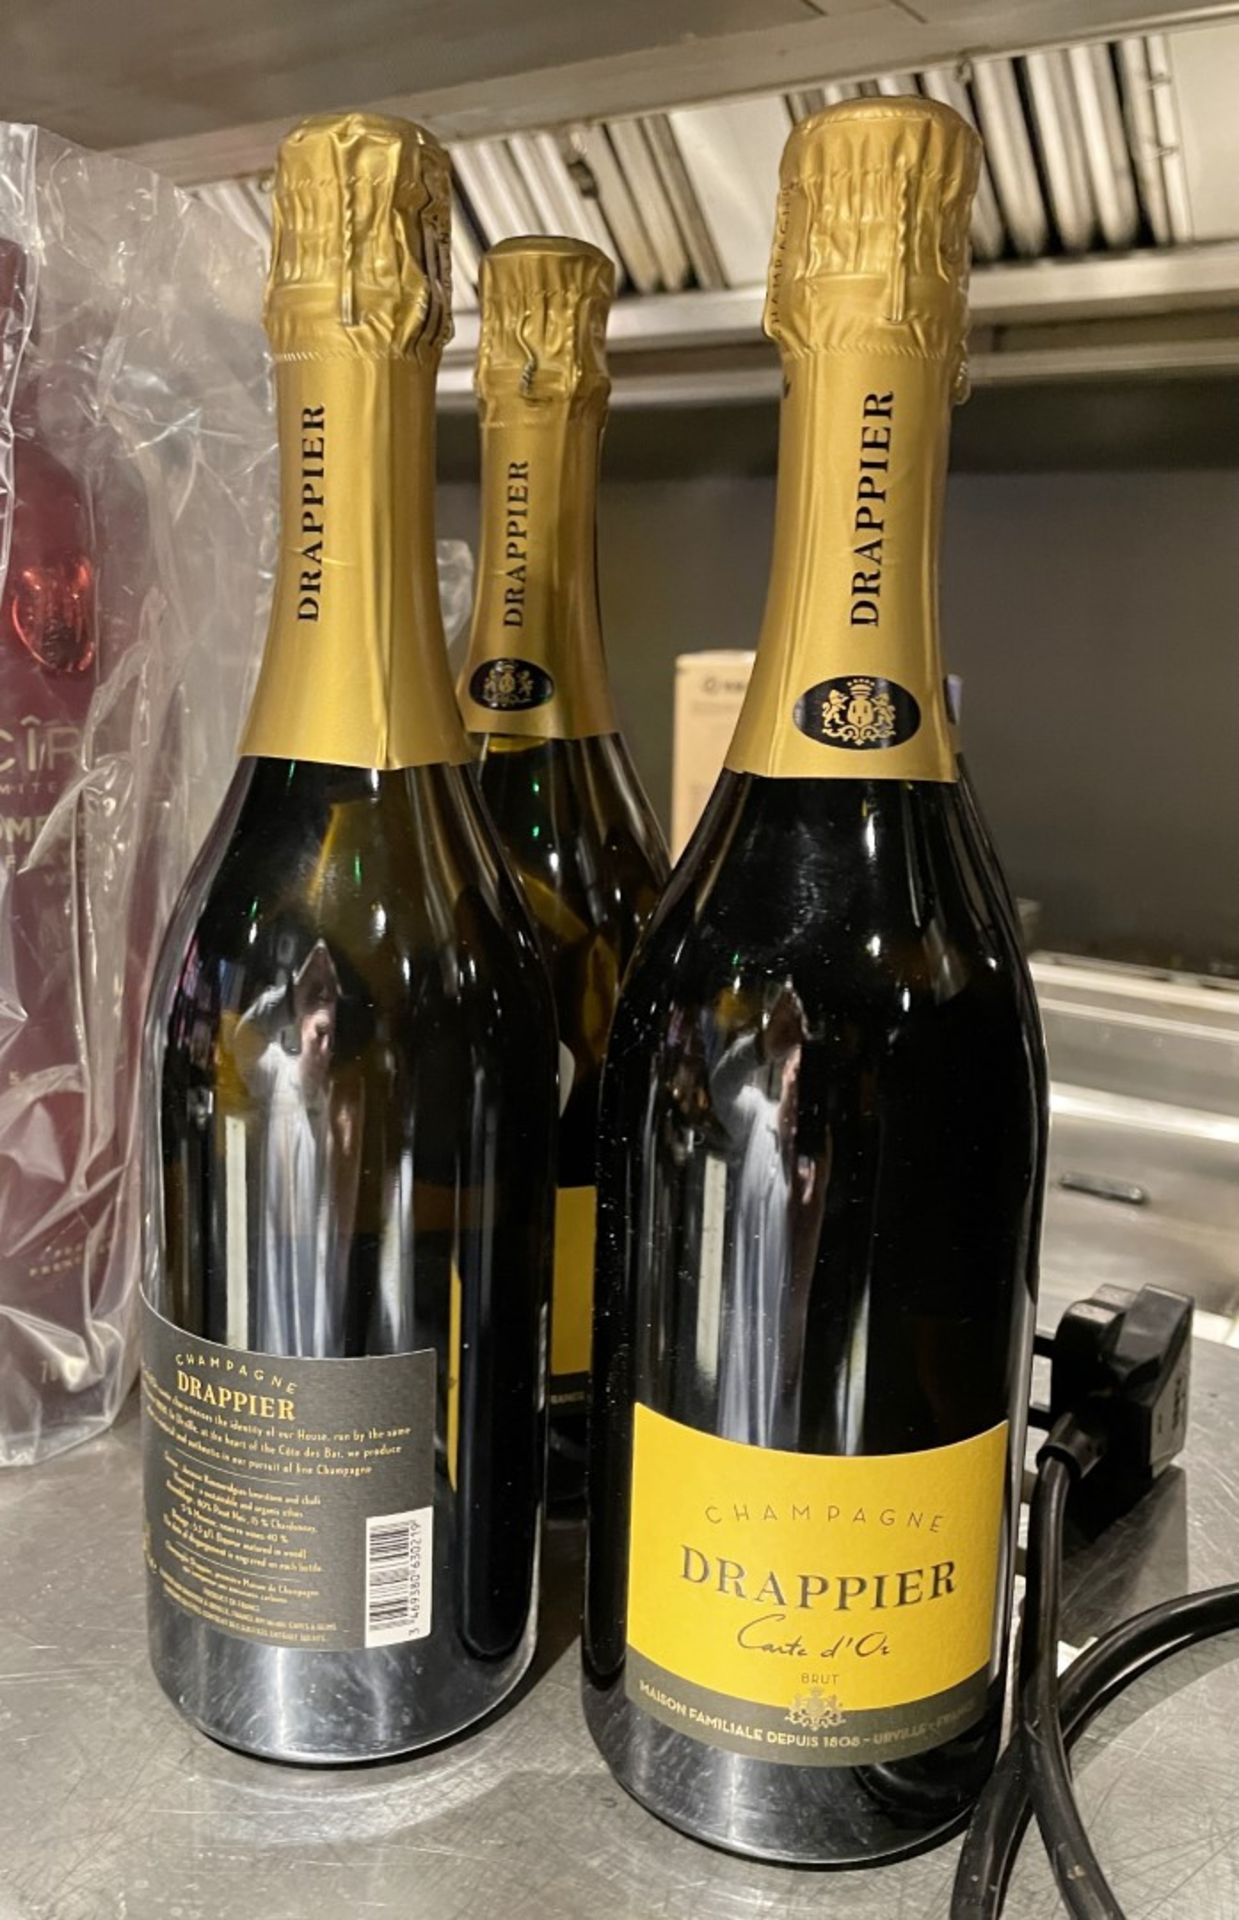 3 x Bottles of 750ml Drappier Champagne - New Unopened Bottles - Image 8 of 9